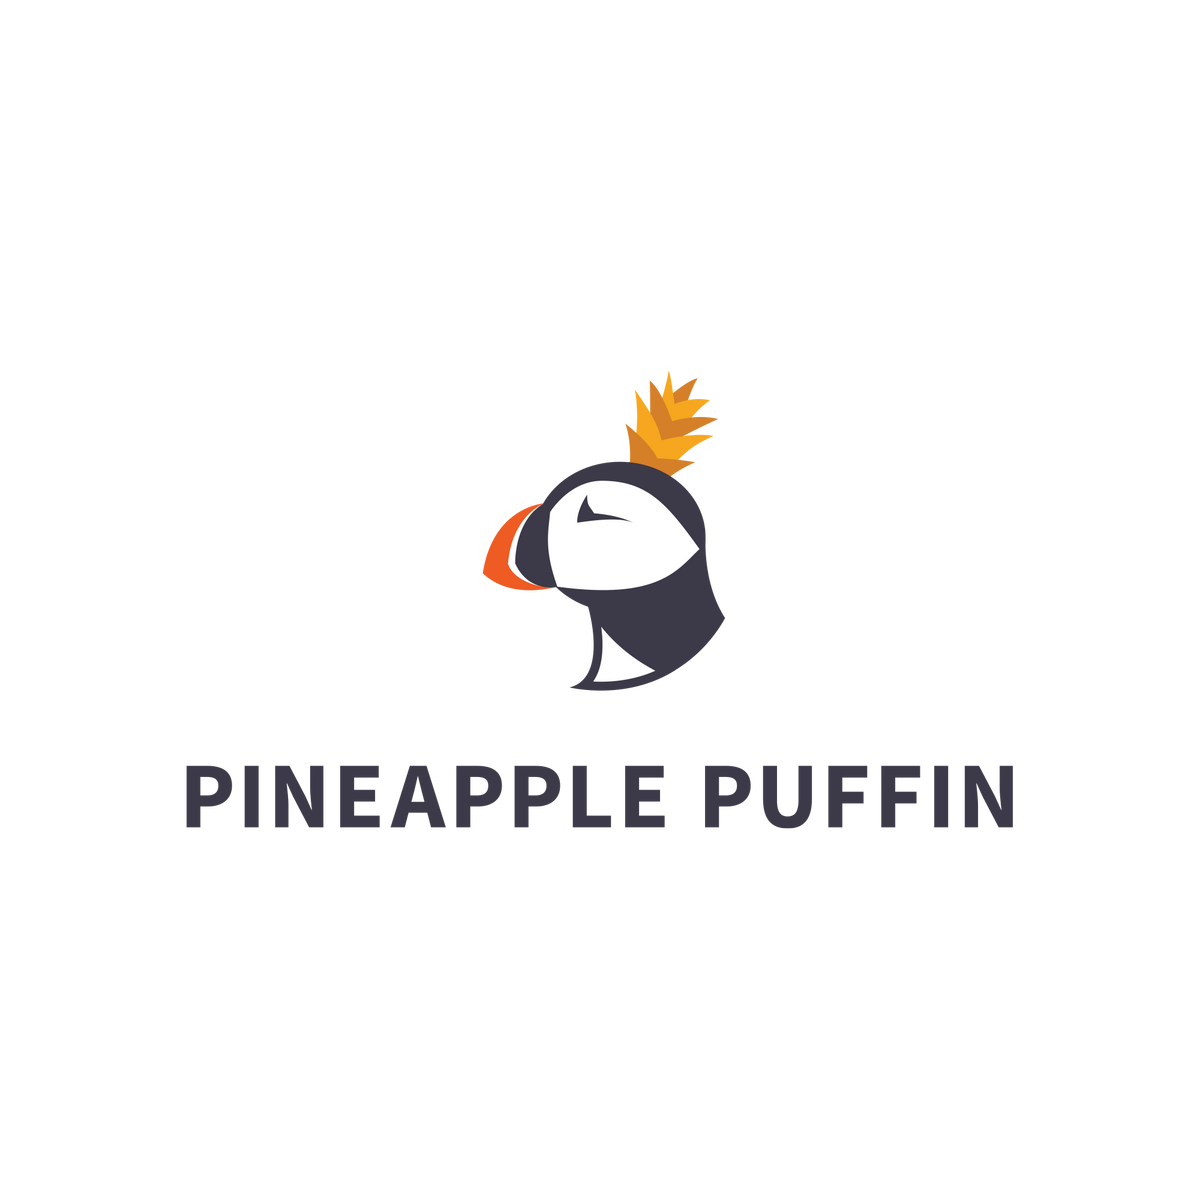 Pineapple Puffin